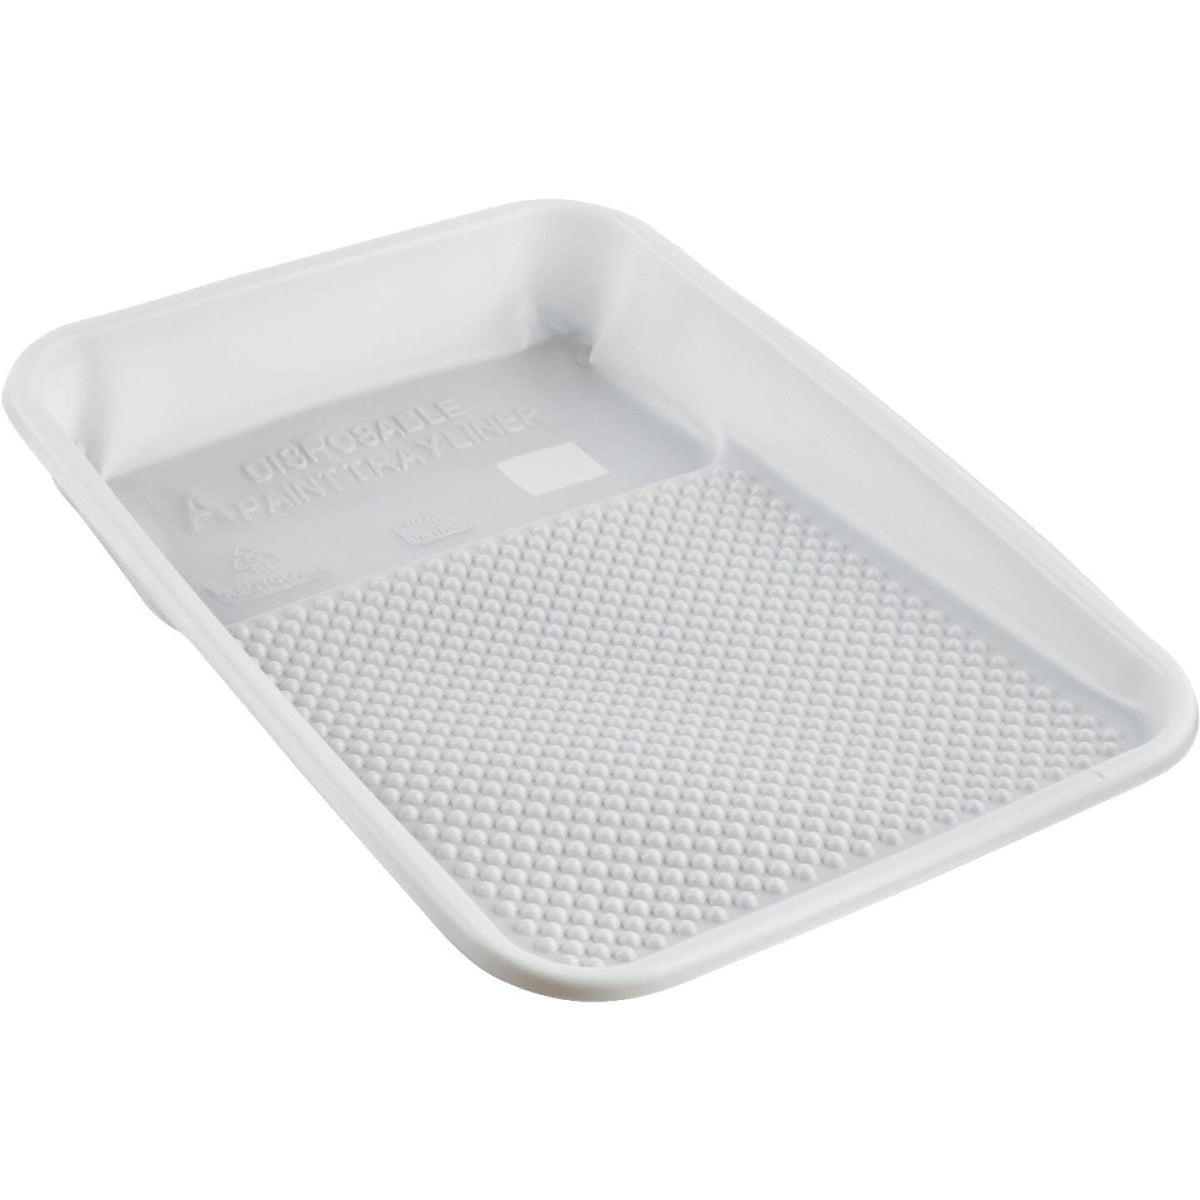 1 Quart Plastic Paint Tray Liner - Holbrook, NY - GTS Builders Supply